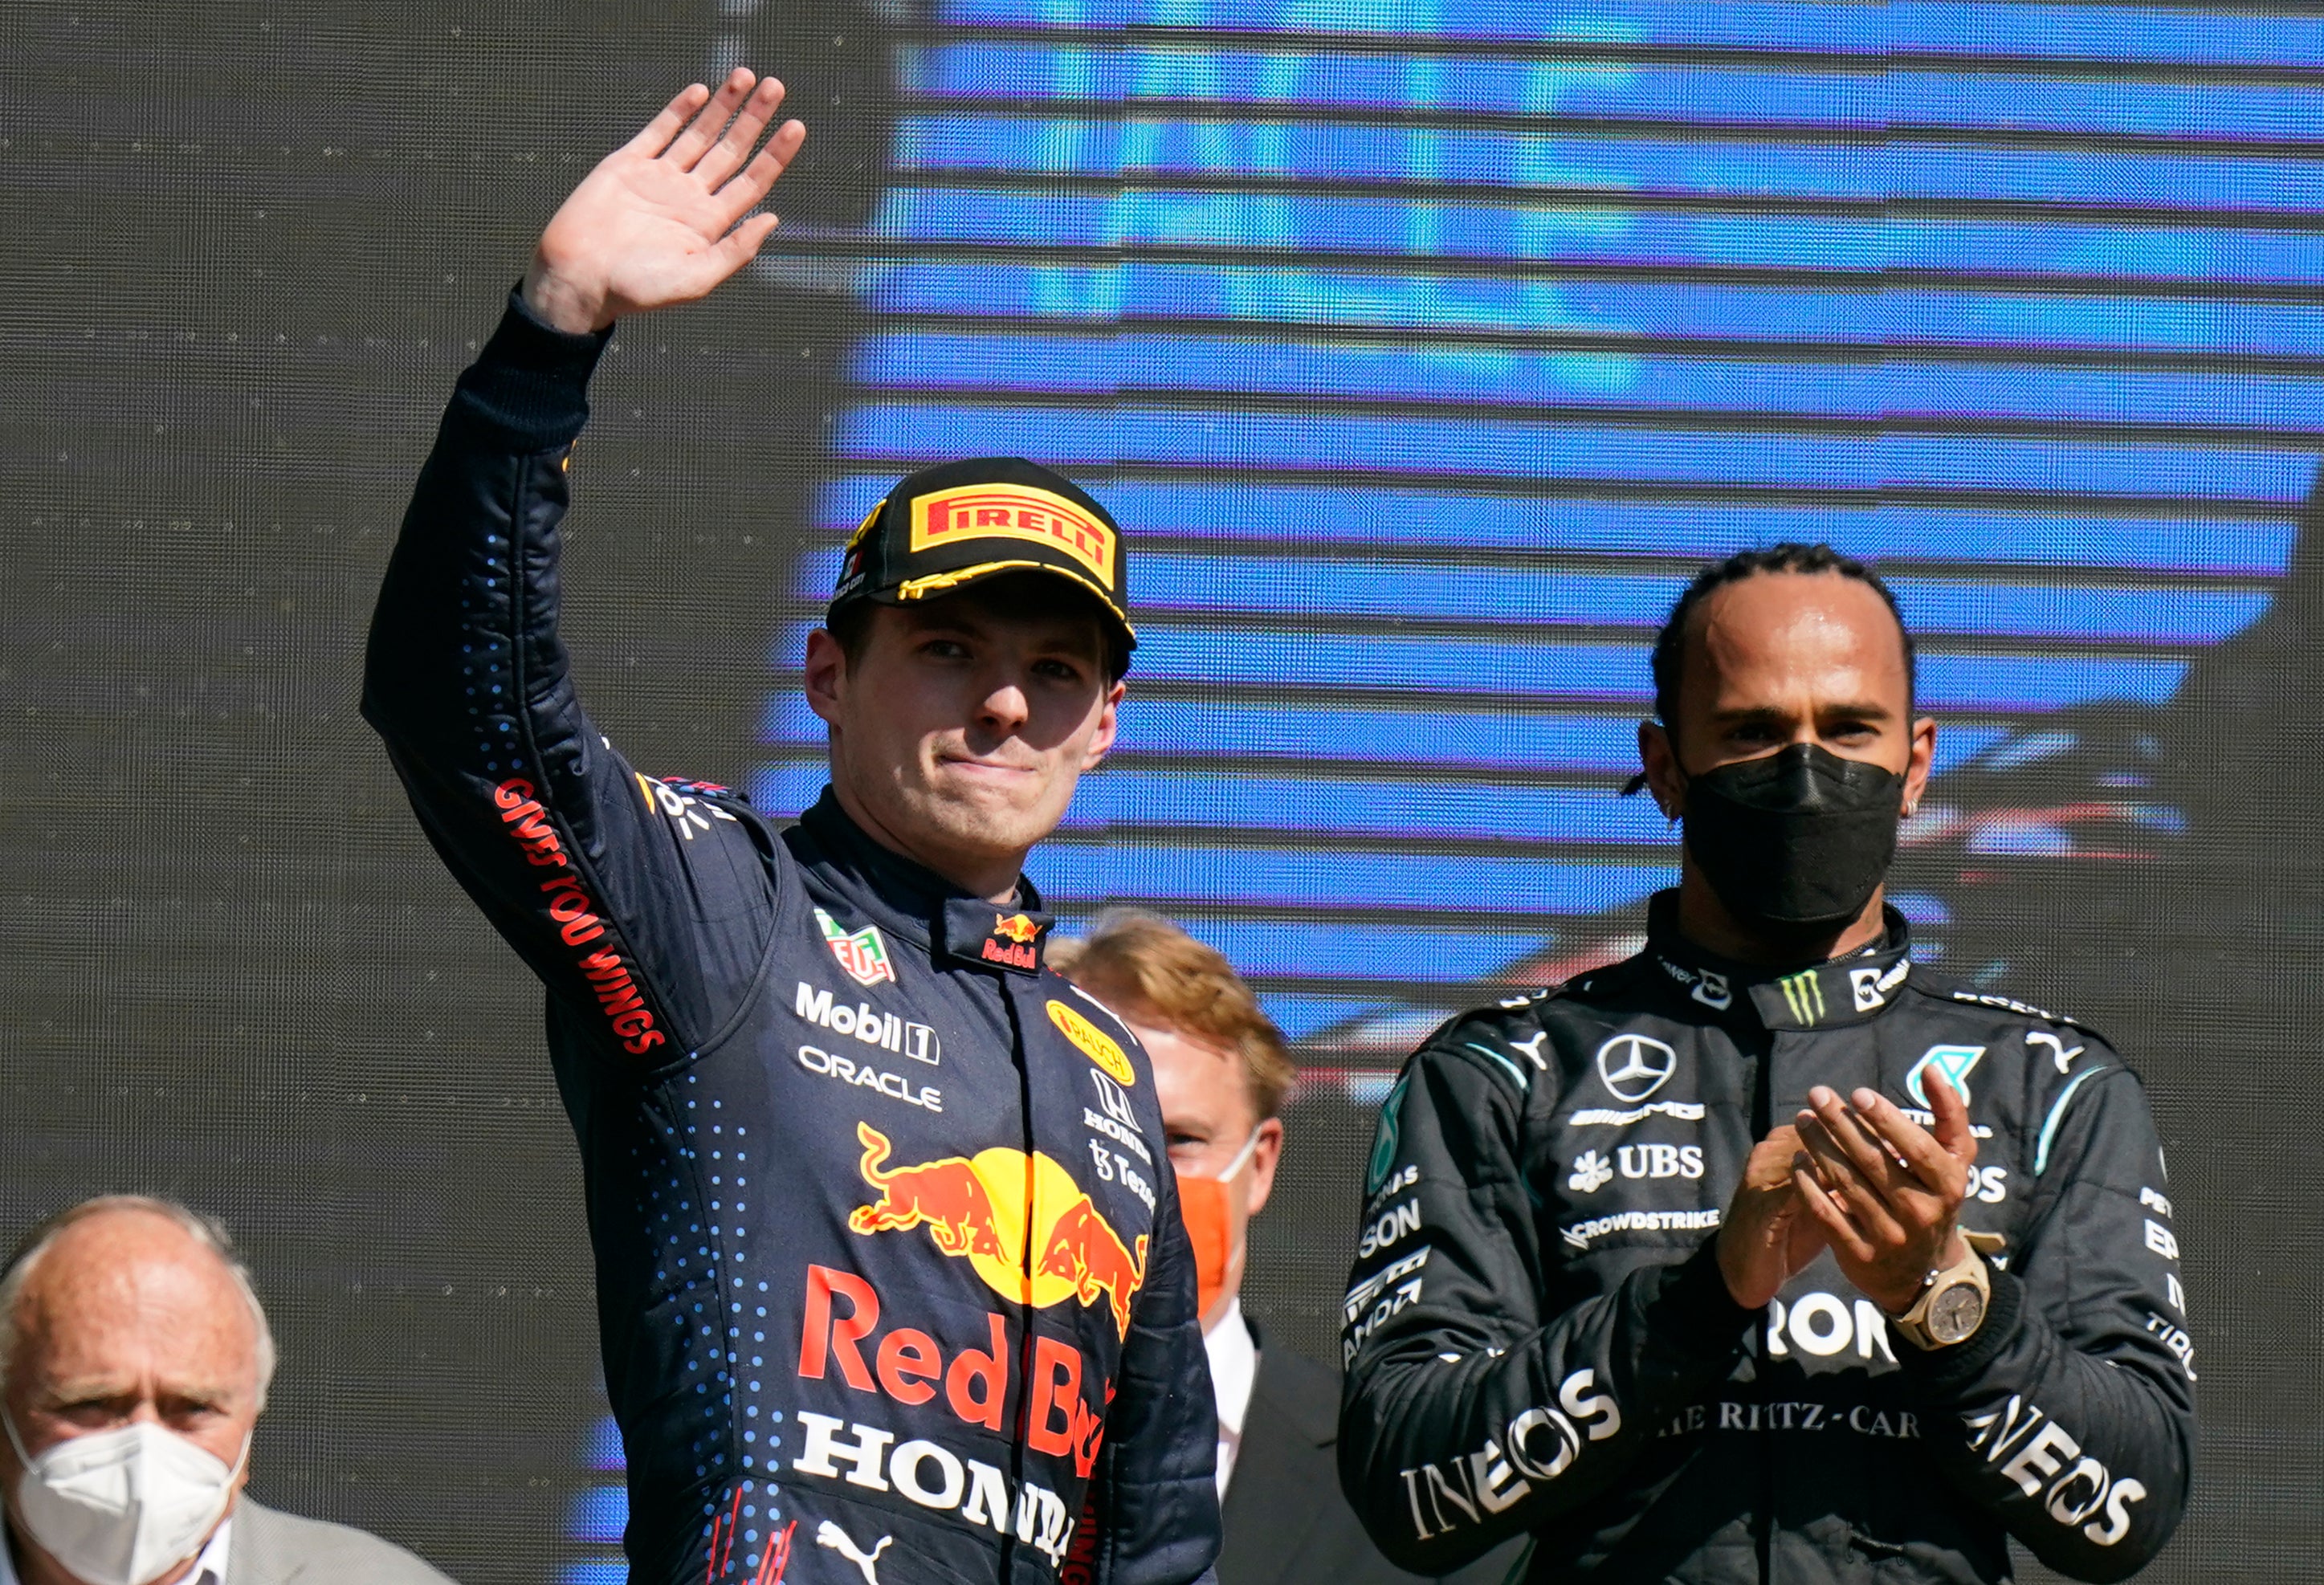 Max Verstappen totally dominated in Mexico